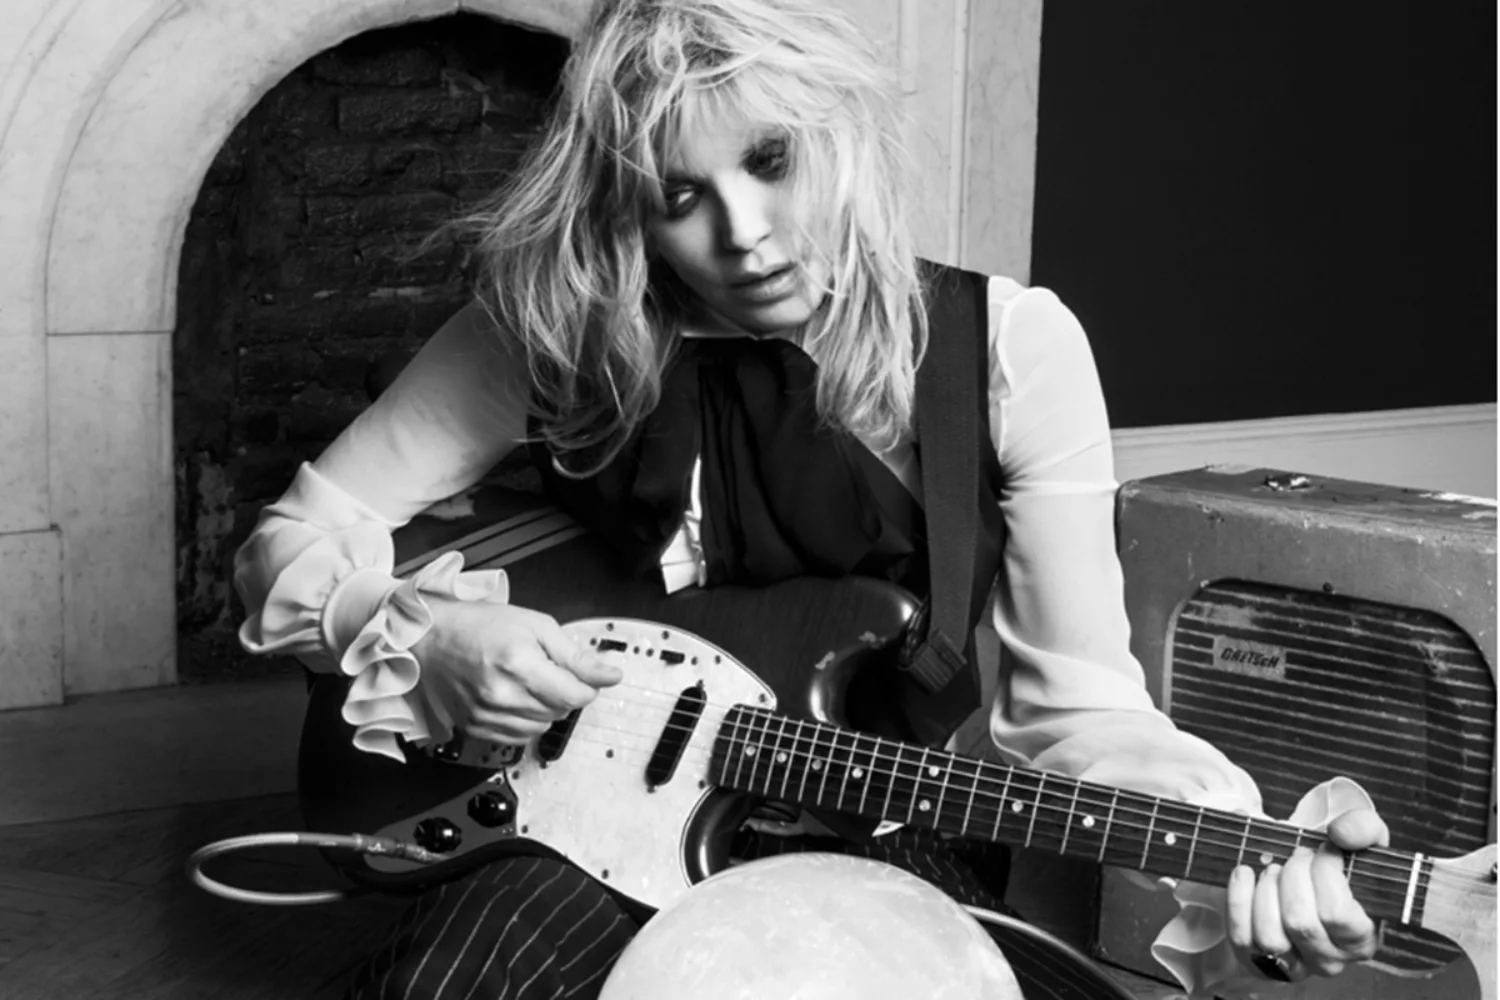 Courtney Love hints at Hole reunion, wants to know what Billy Corgan’s problem is